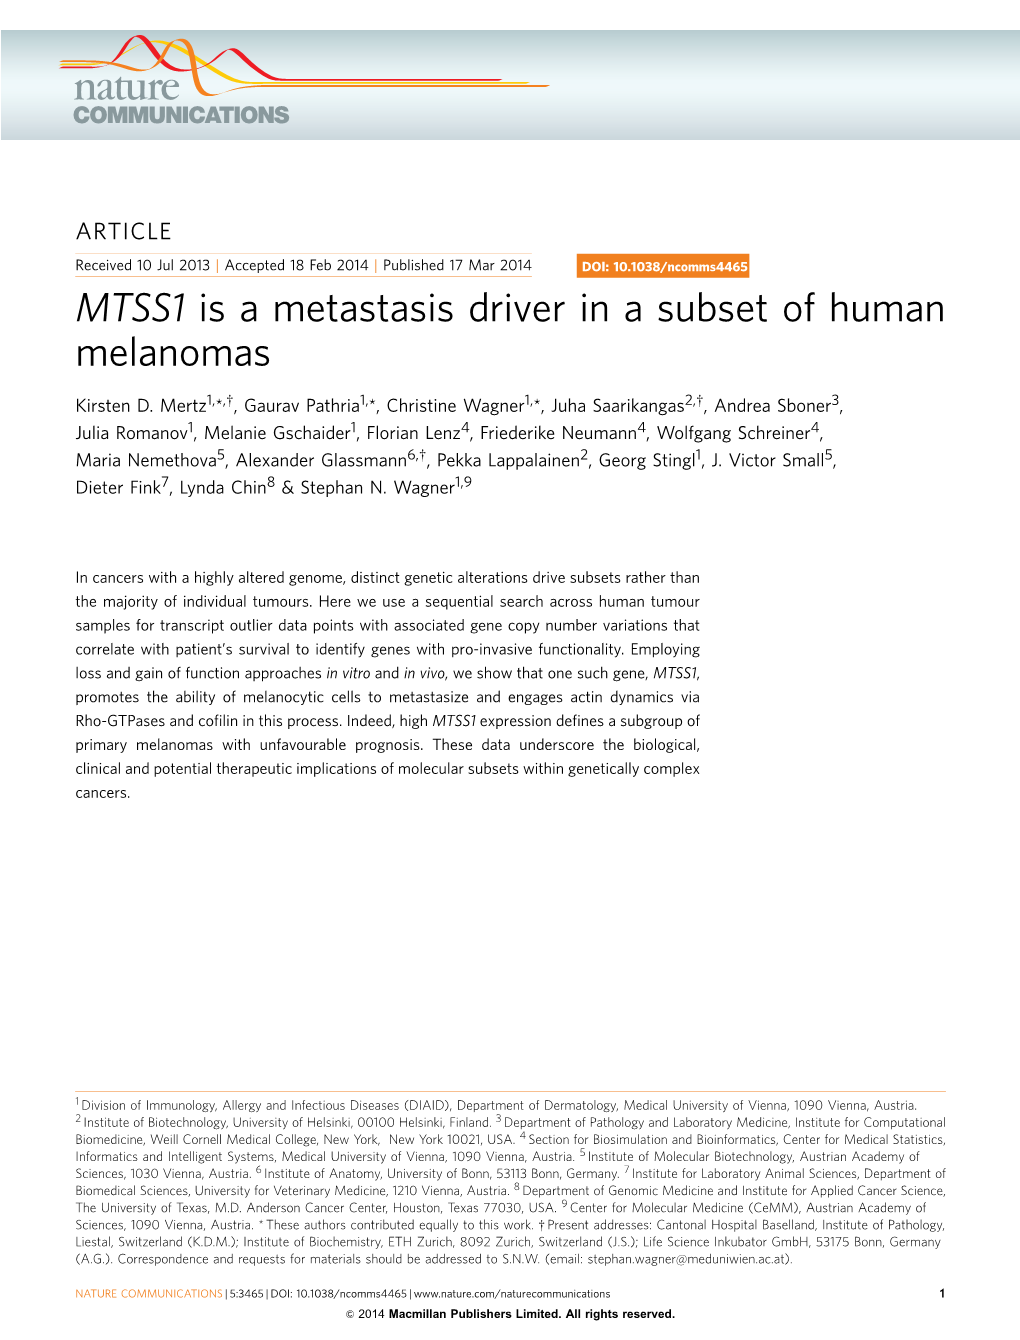 MTSS1 Is a Metastasis Driver in a Subset of Human Melanomas